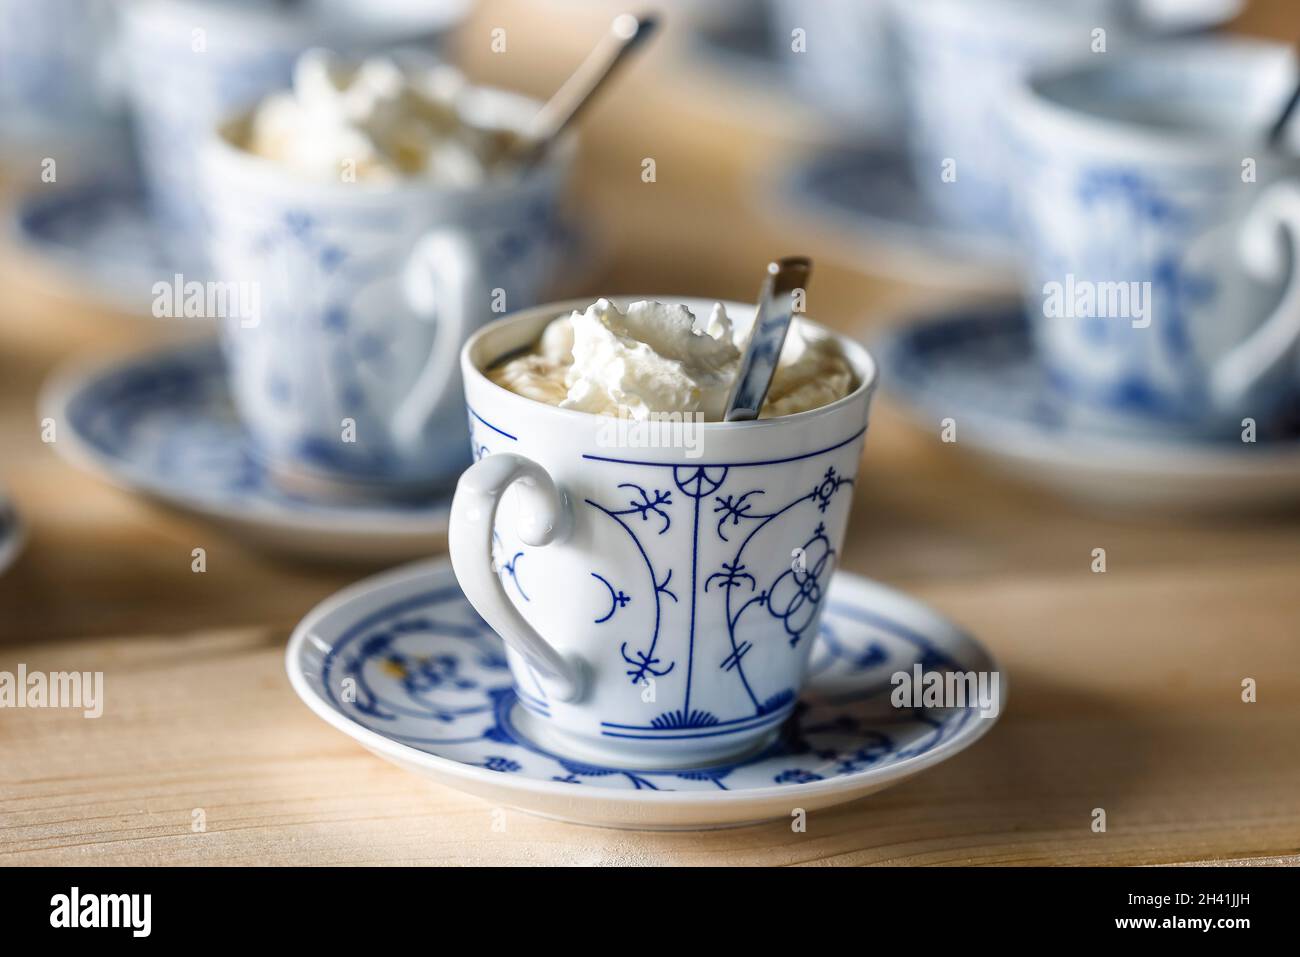 Cups filled with phariseer and cream stand on a table Stock Photo